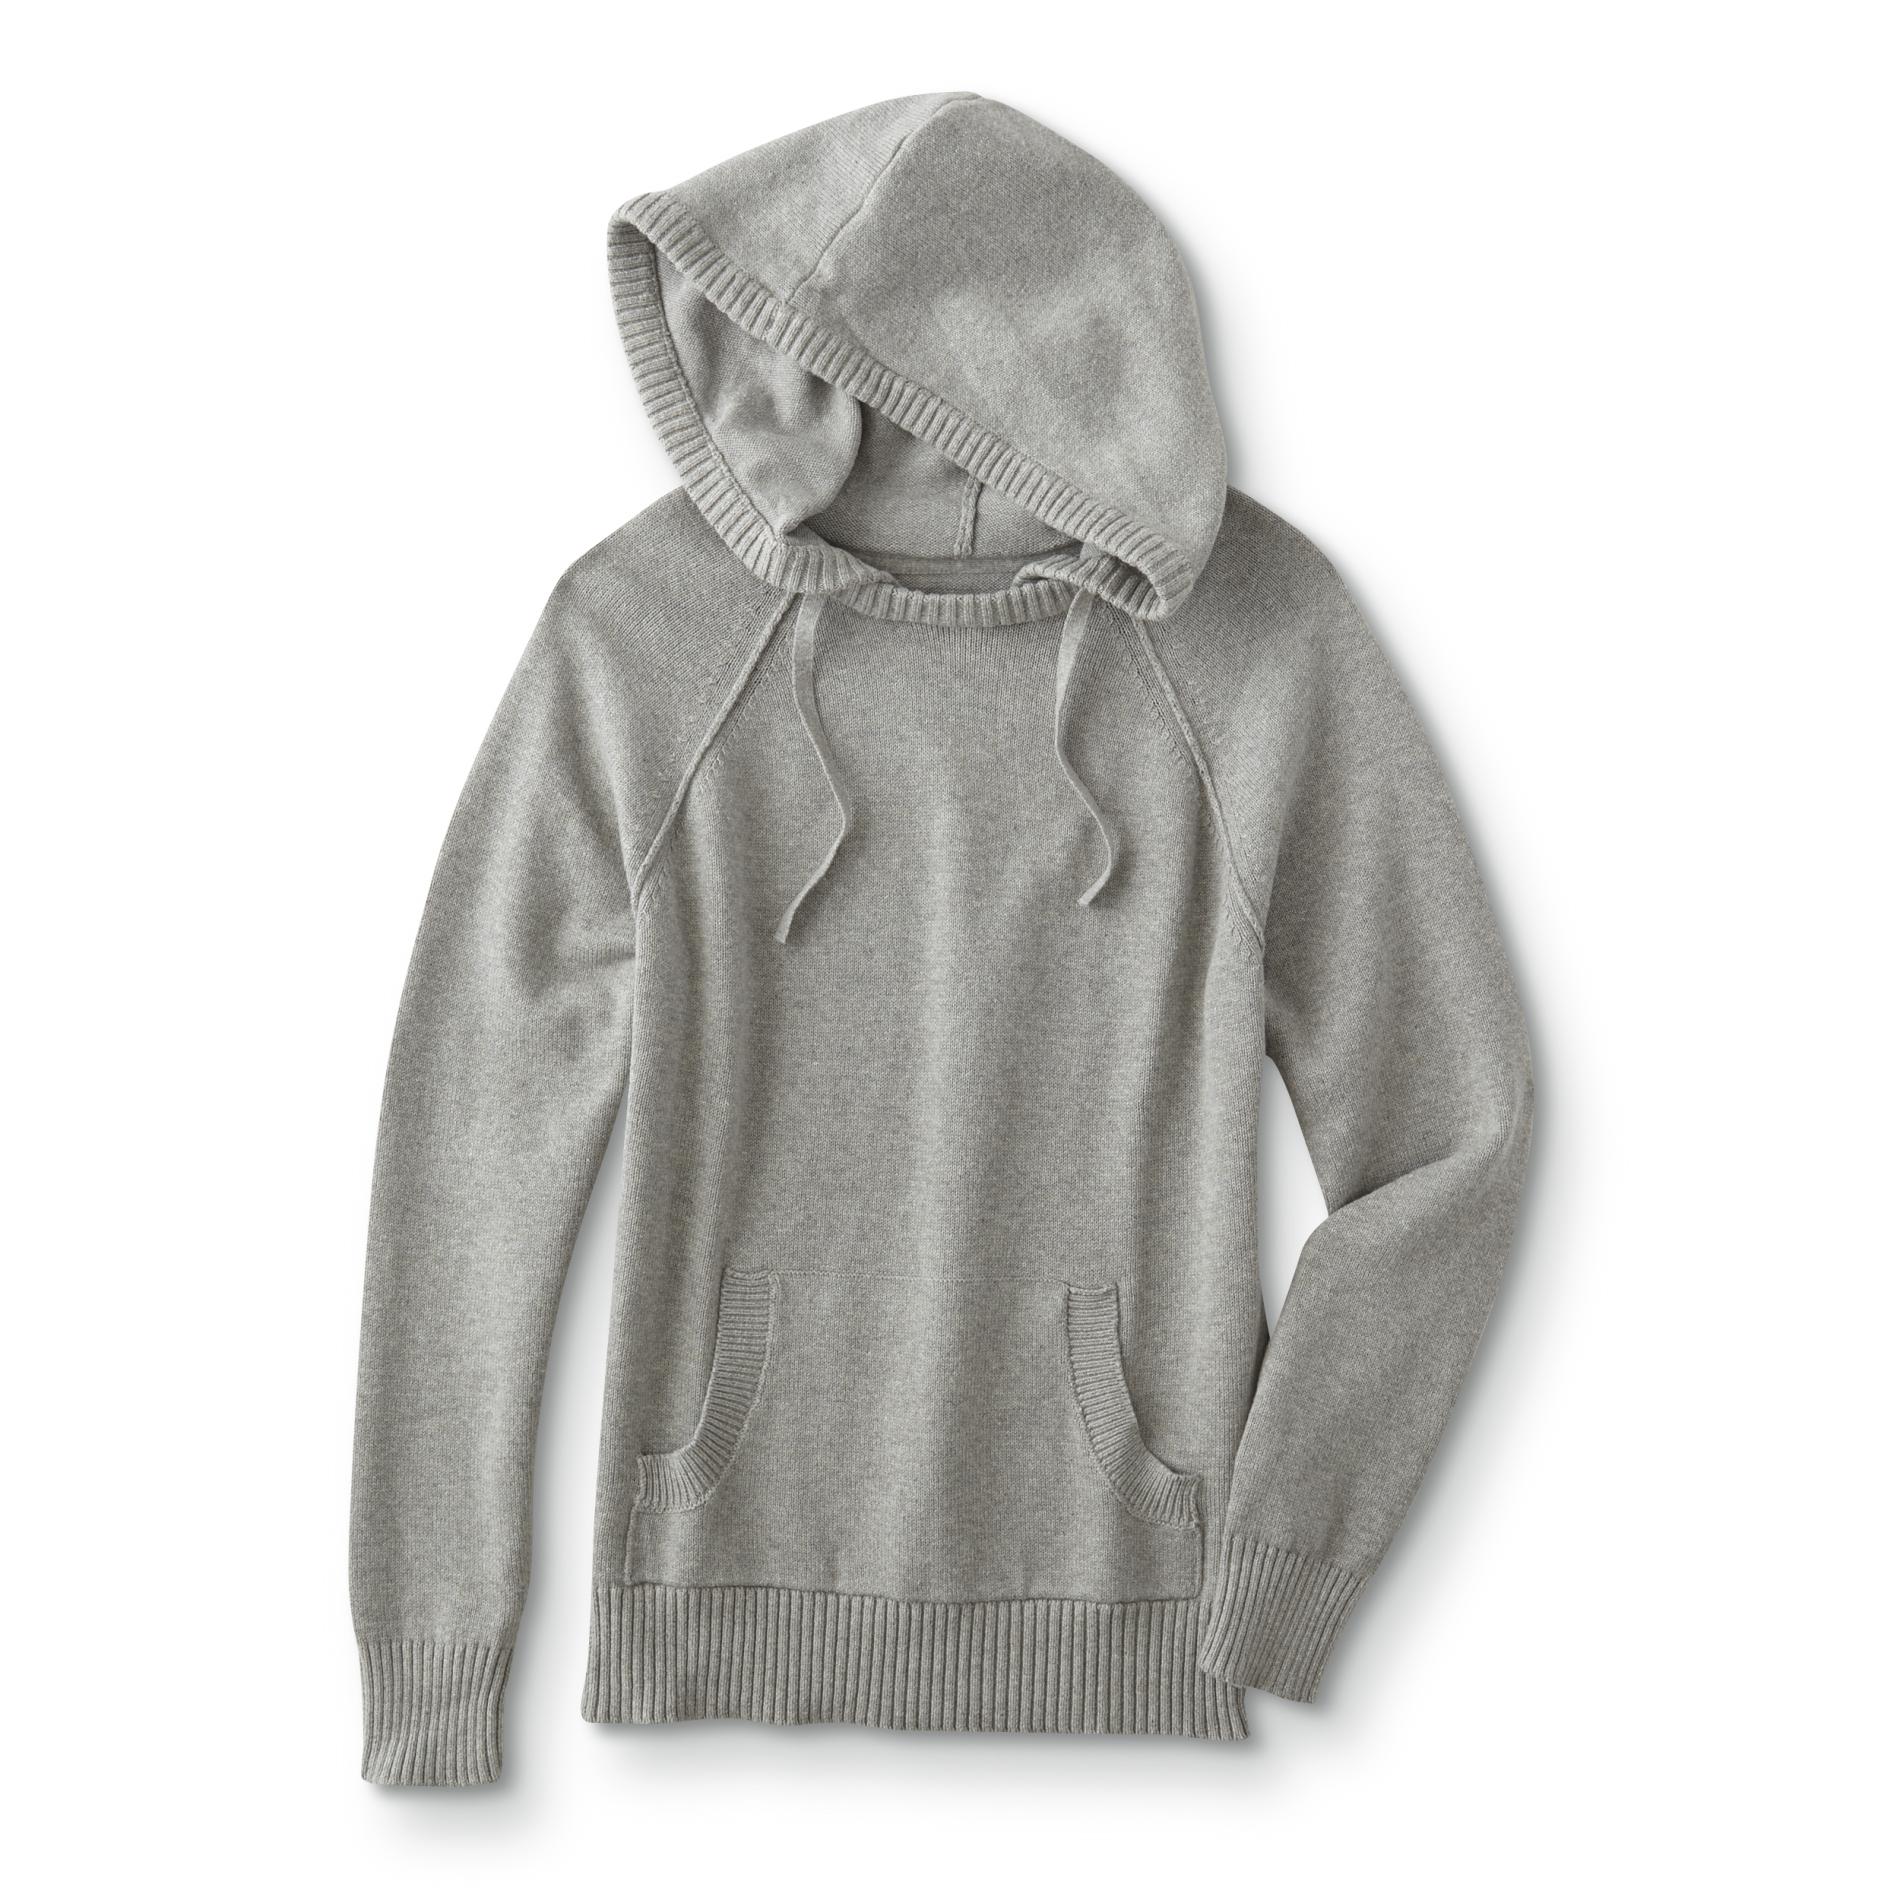 Amplify Young Men's Hooded Sweater